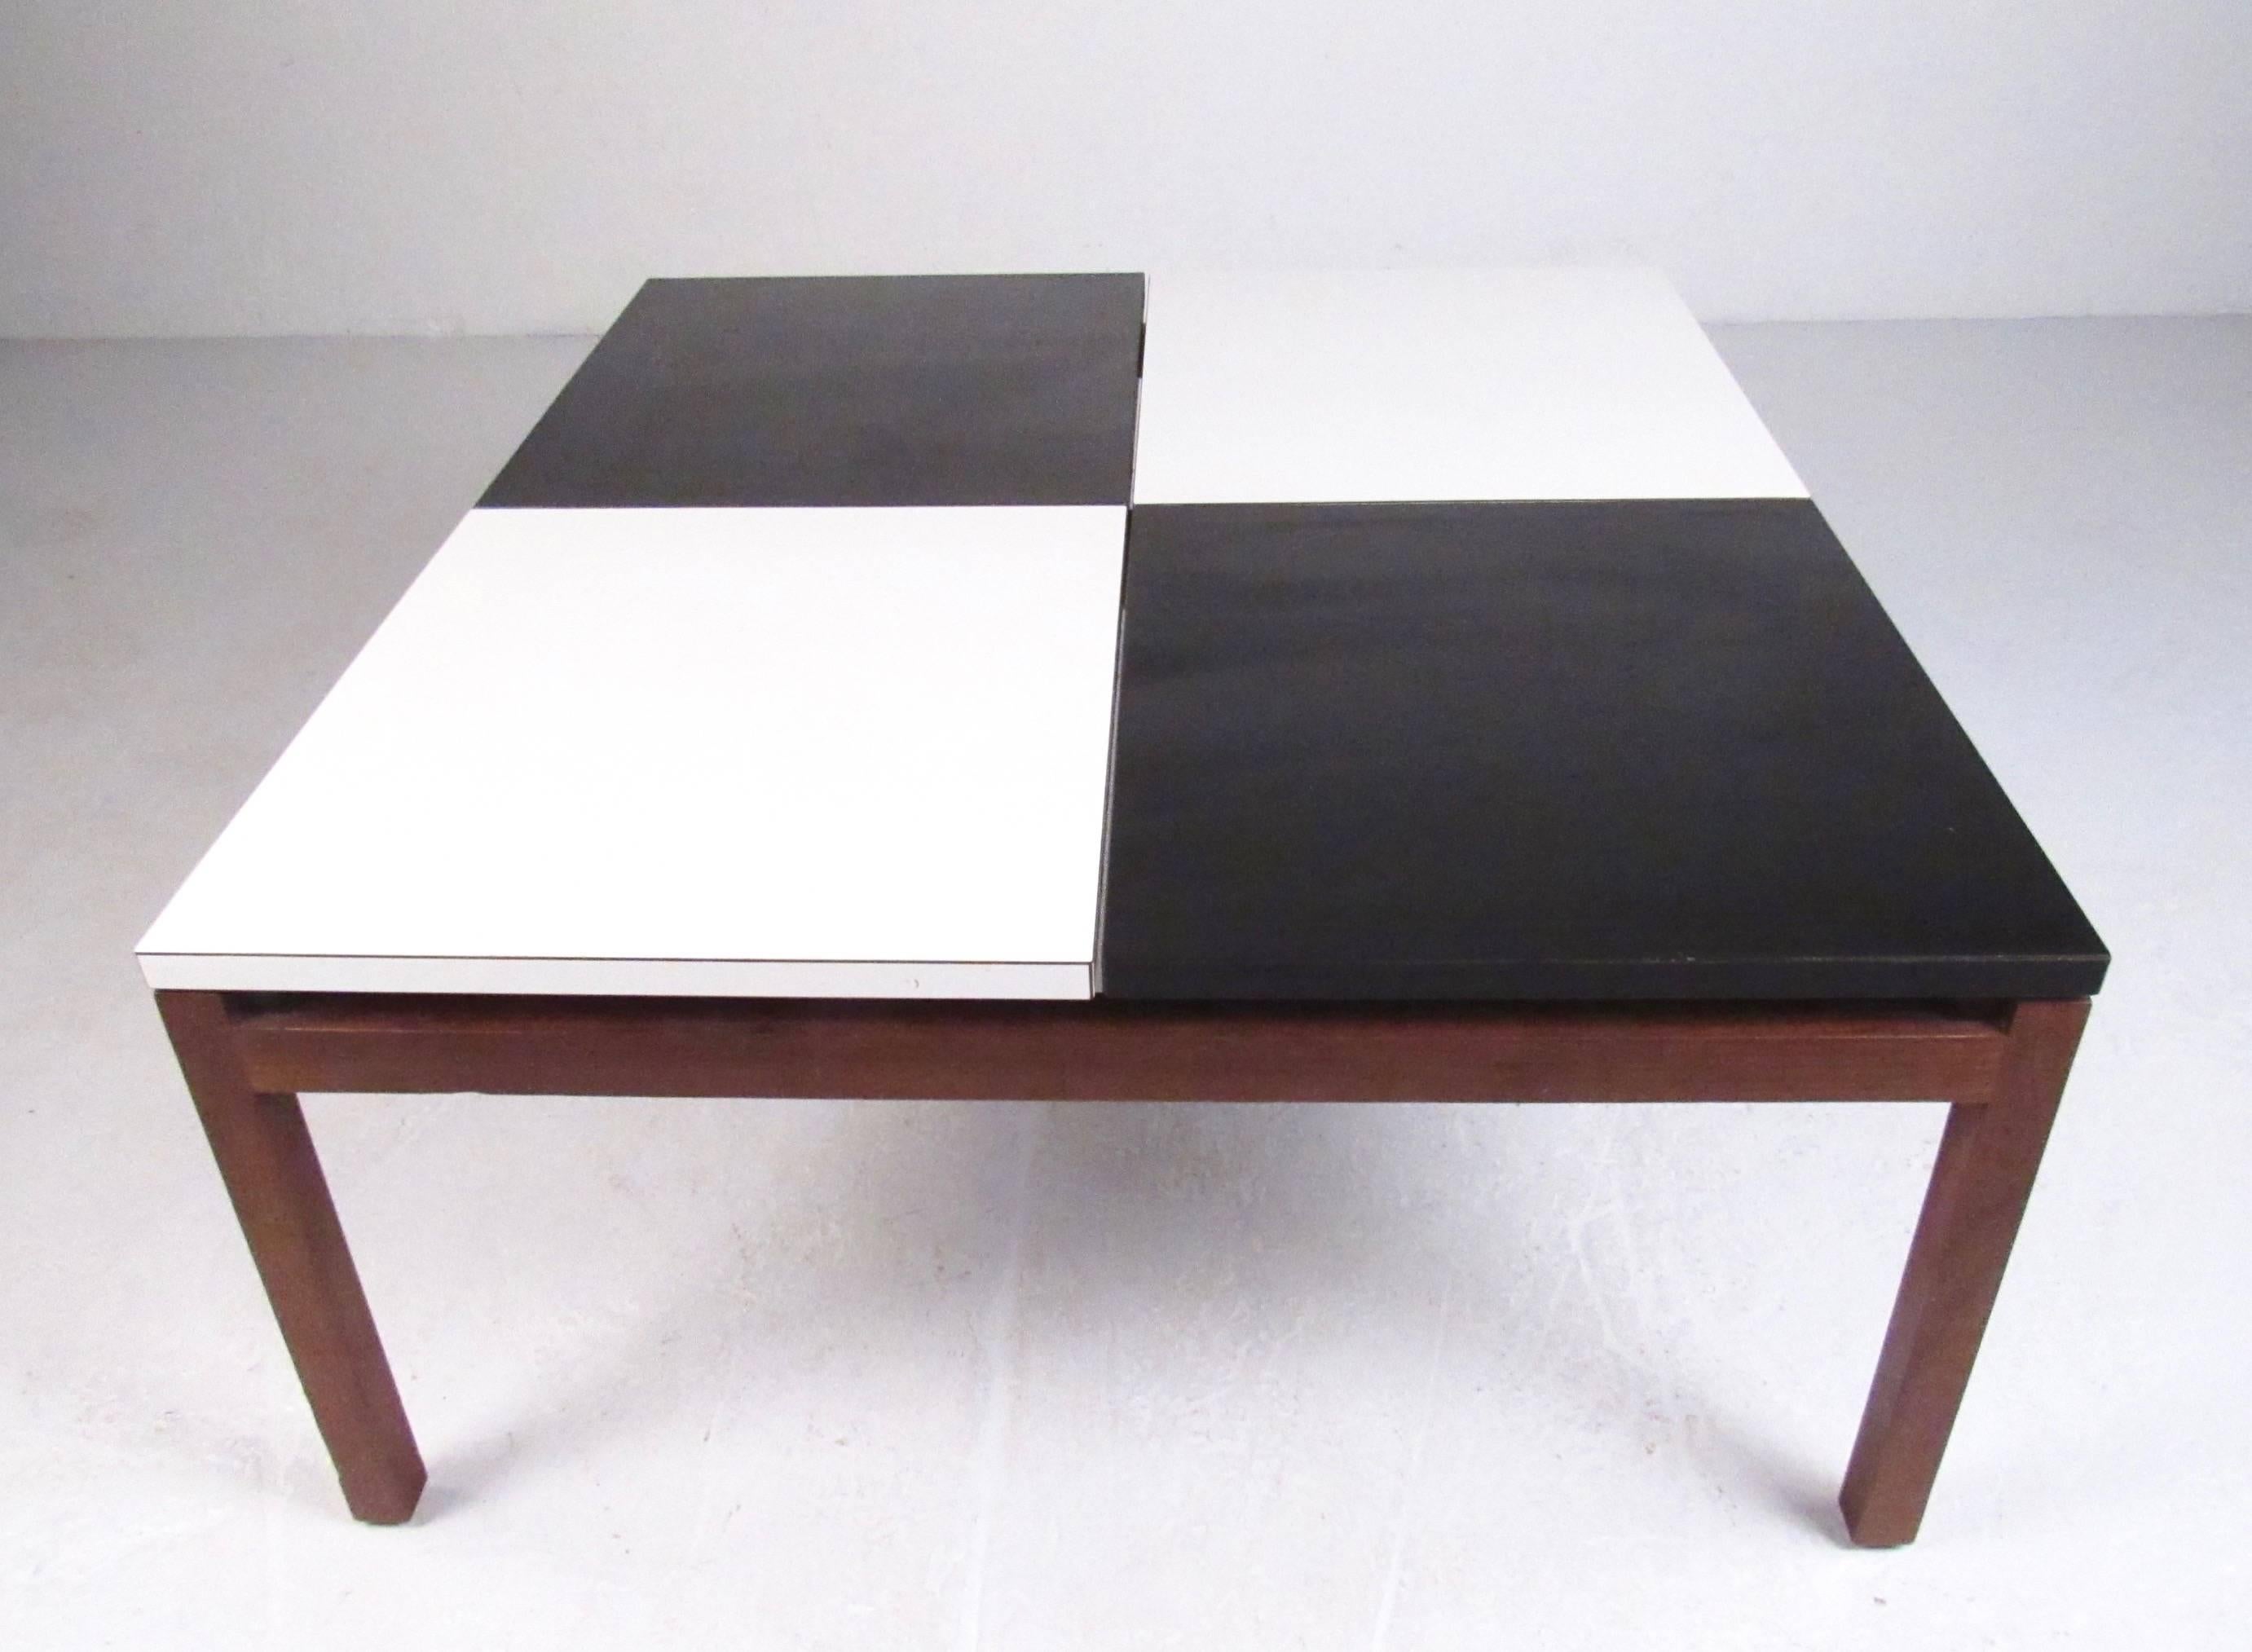 This stylish 1960s cocktail table was designed by Lewis Butler for Knoll Associates Inc. and showcased iconic black and white checkerboard design with hardwood base. Unique Mid-Century Modern style makes this eye-catching coffee table the perfect